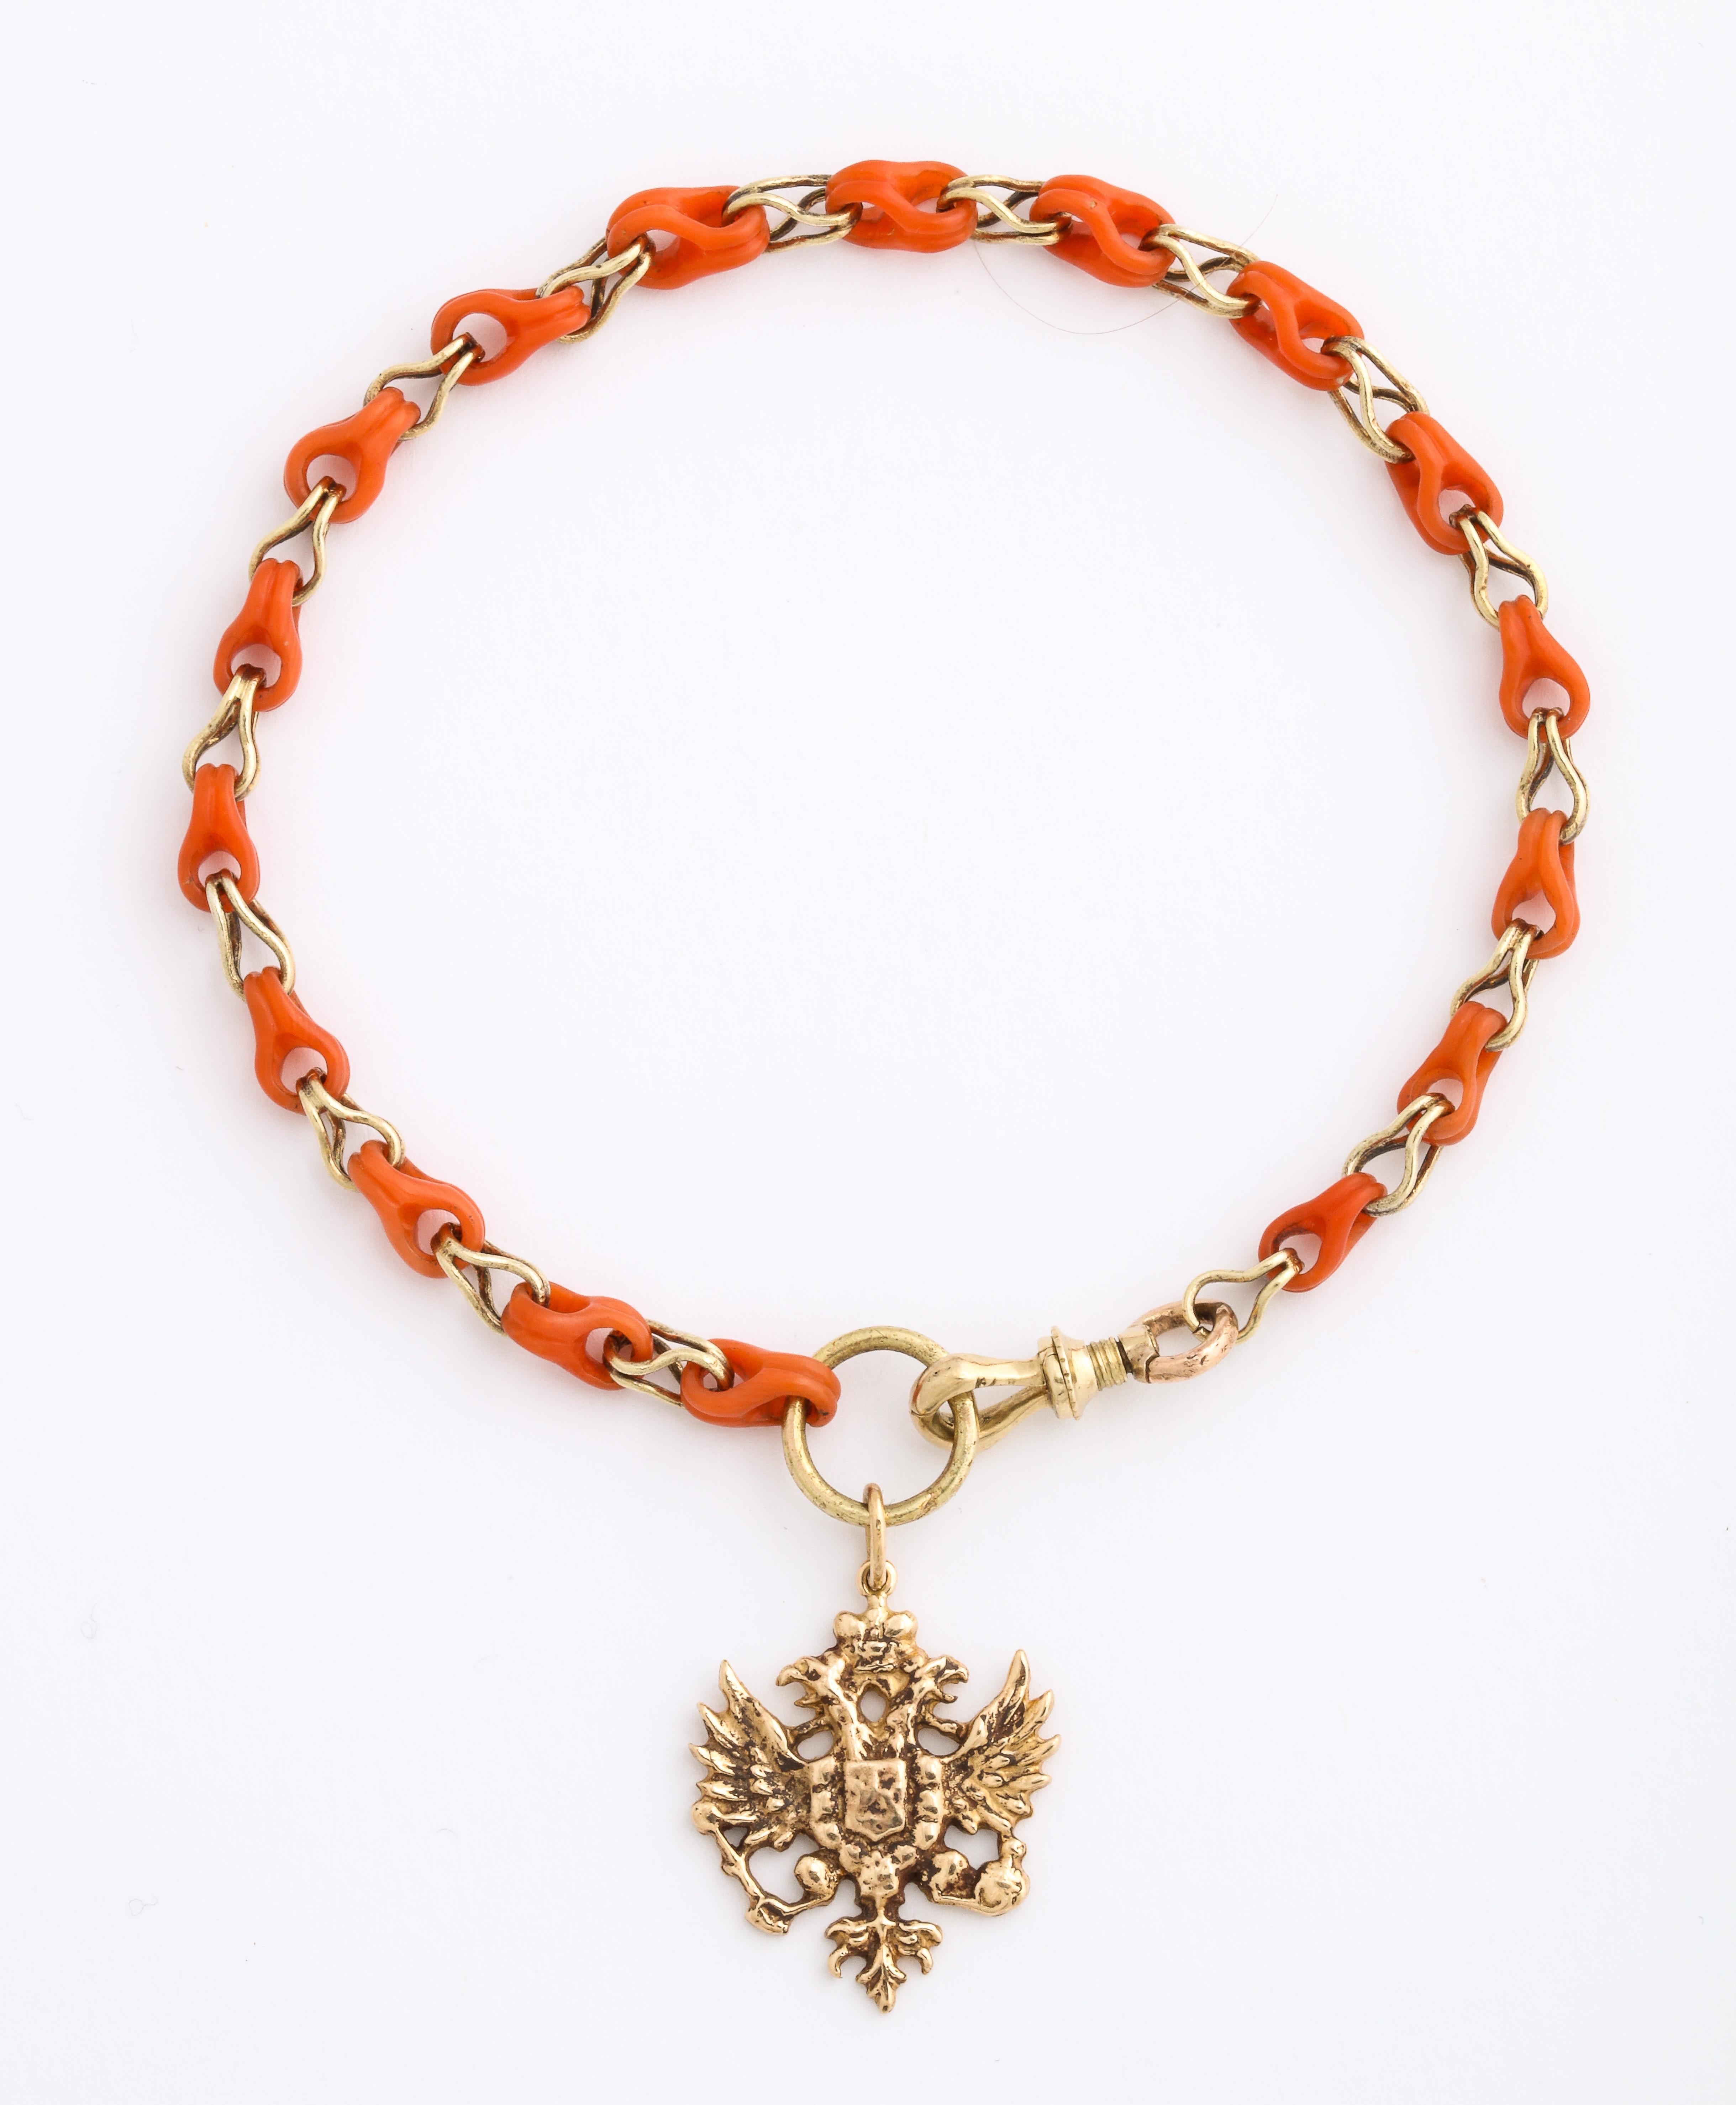 From the Romanov era, a rare coral bracelet from Russia designed as seventeen carved open pear-shaped coral links alternating with openwork gold links of similar design. One end is fitted with a gold swivel clasp, the other with a large gold ring